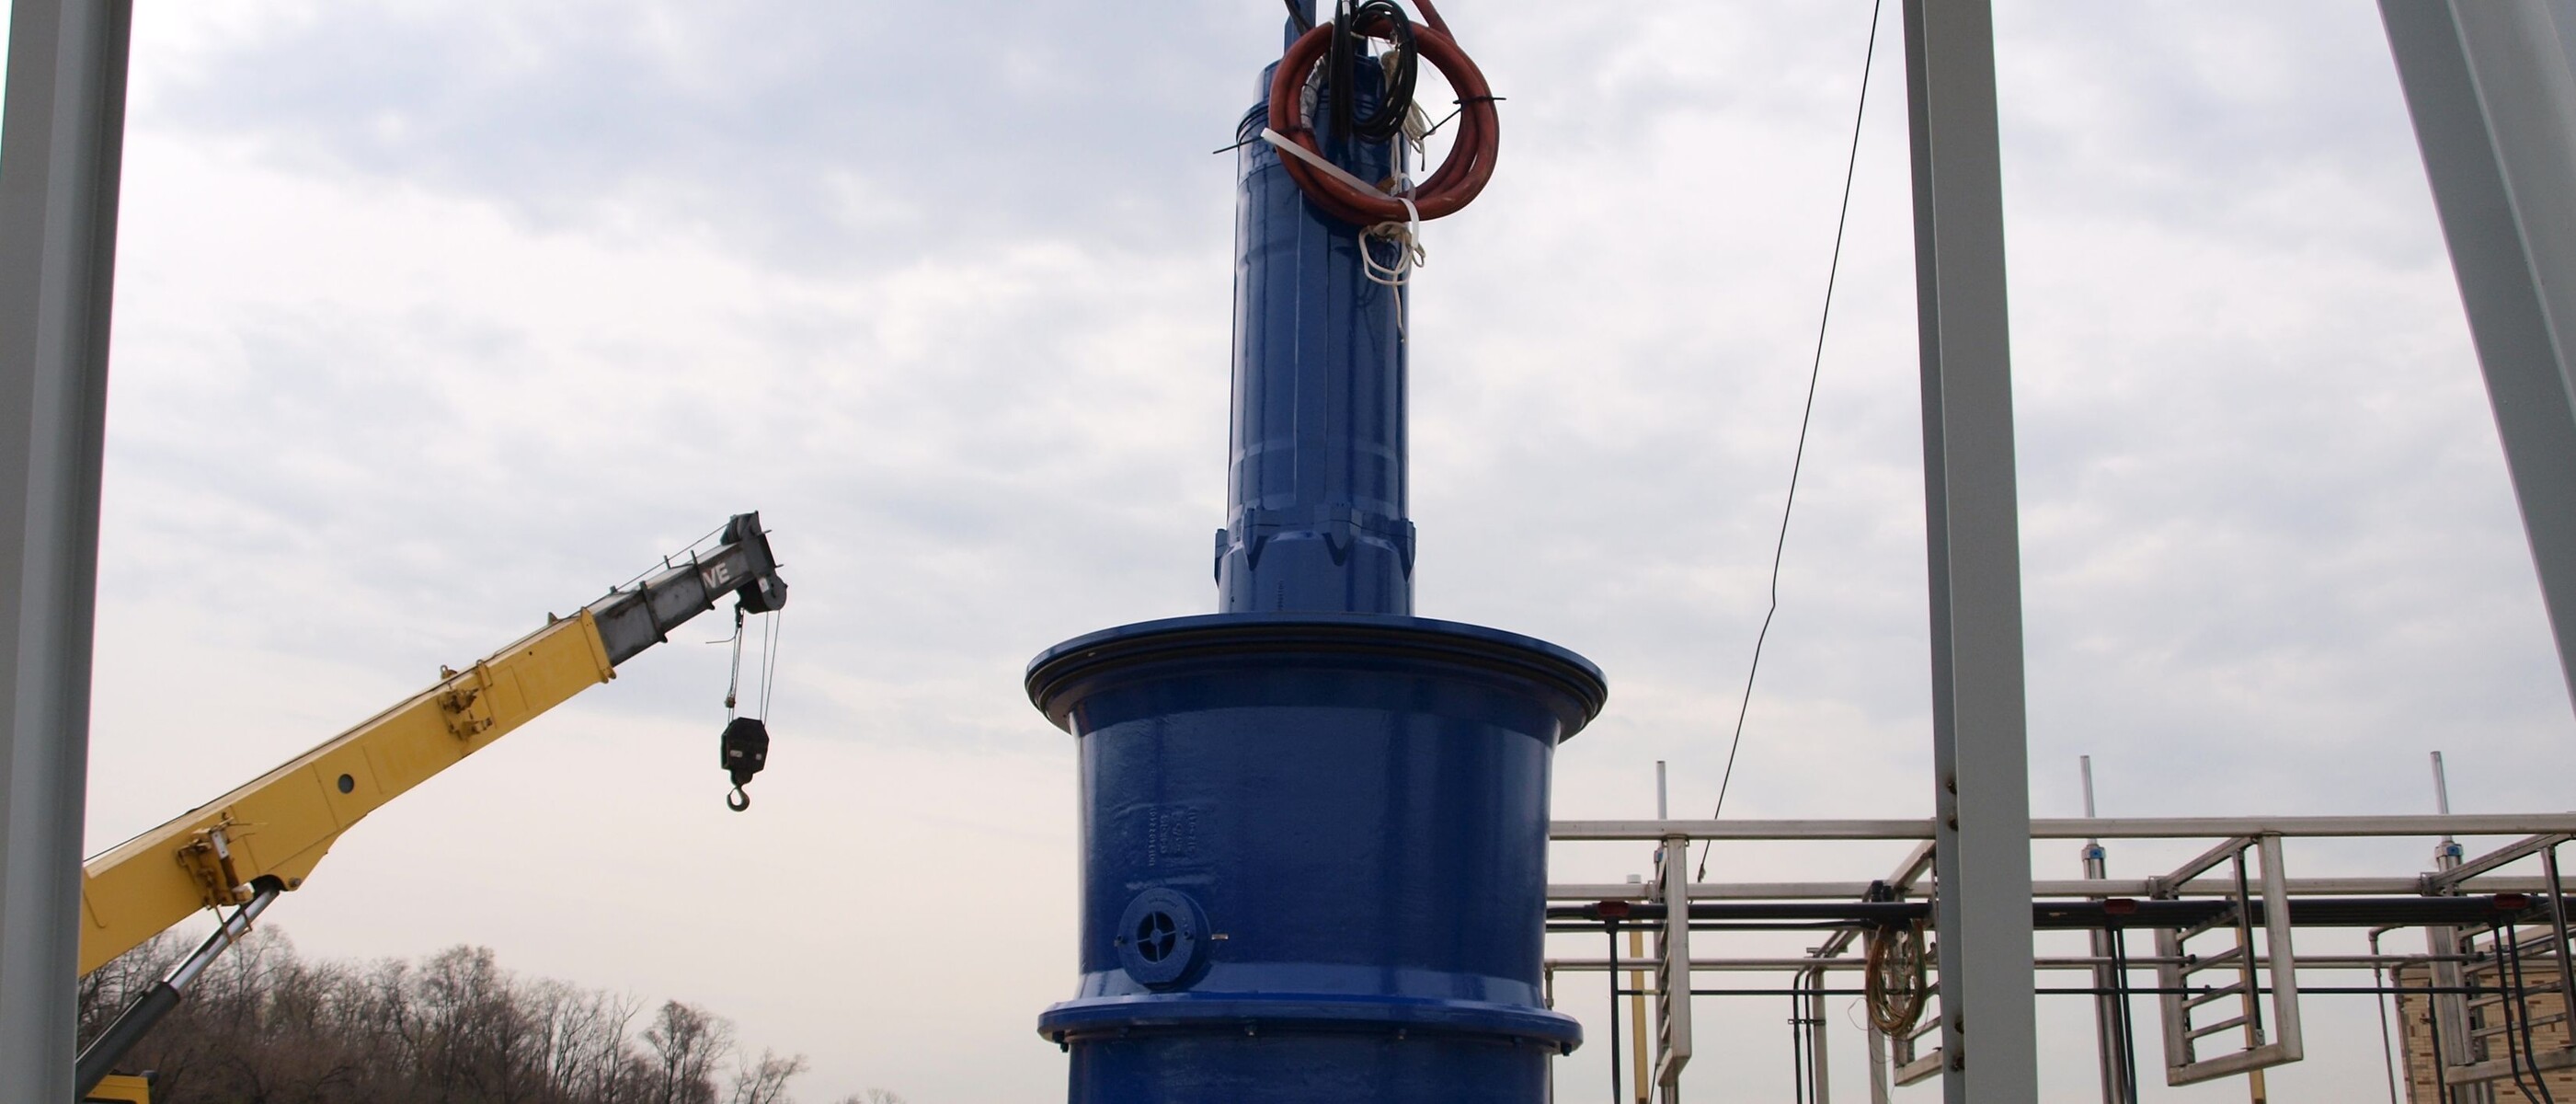 The Amacan P is a safe, reliable and energy-efficient solution for a wide range of pumping jobs